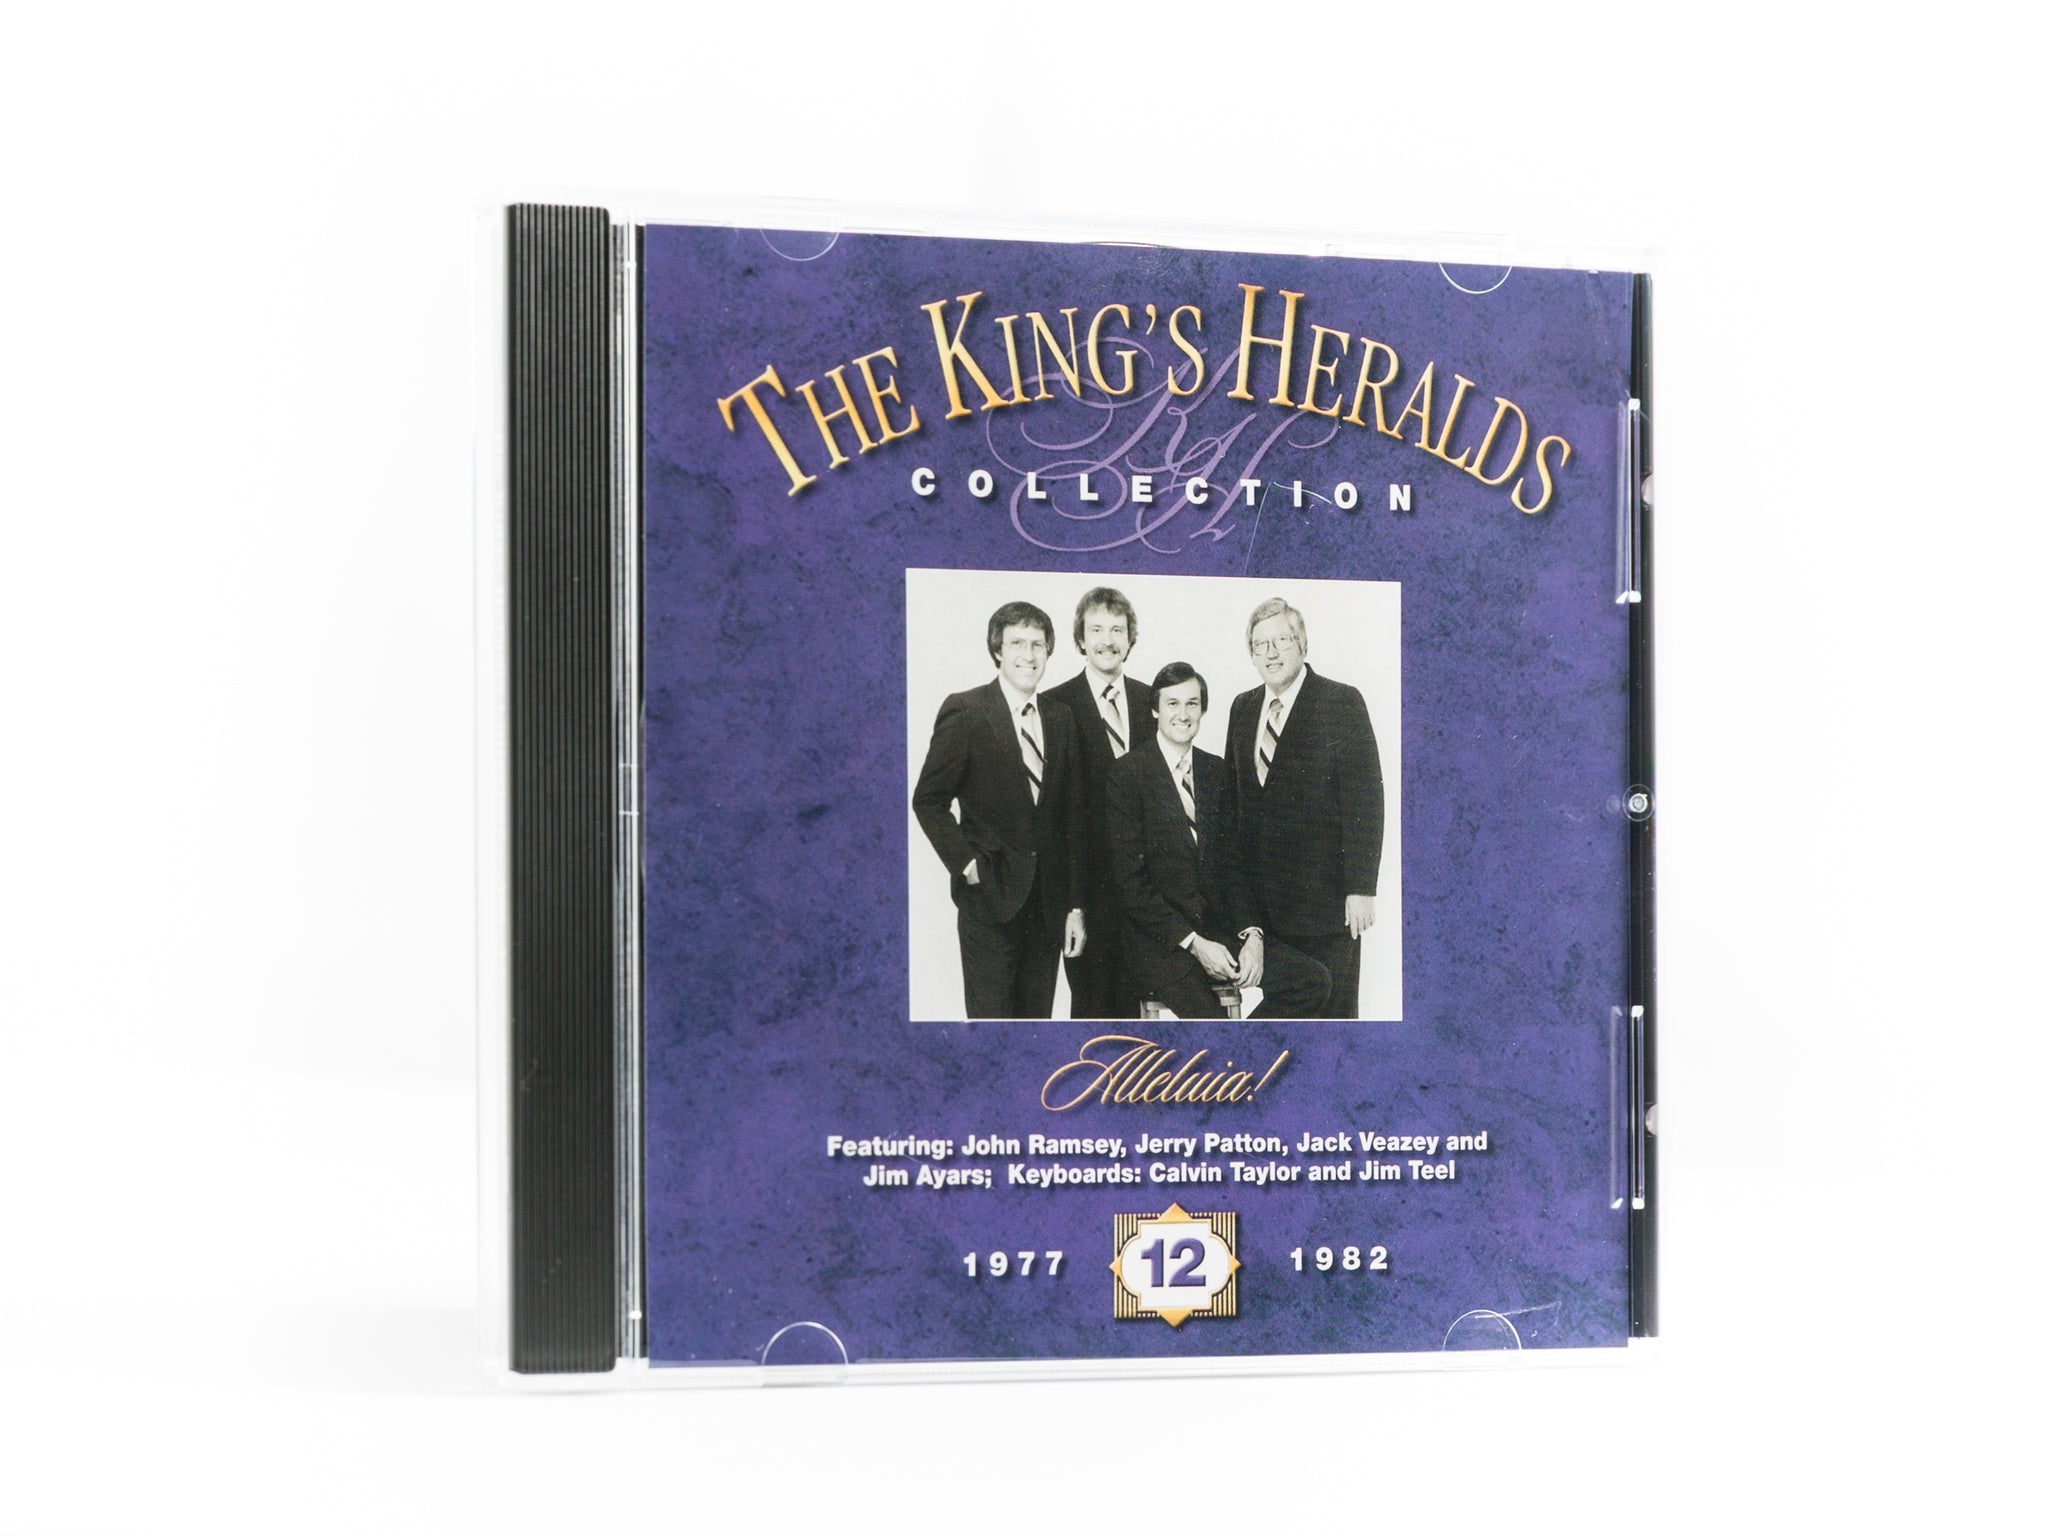 King's Heralds CD Collection - Vol. 12 - Alleluia!